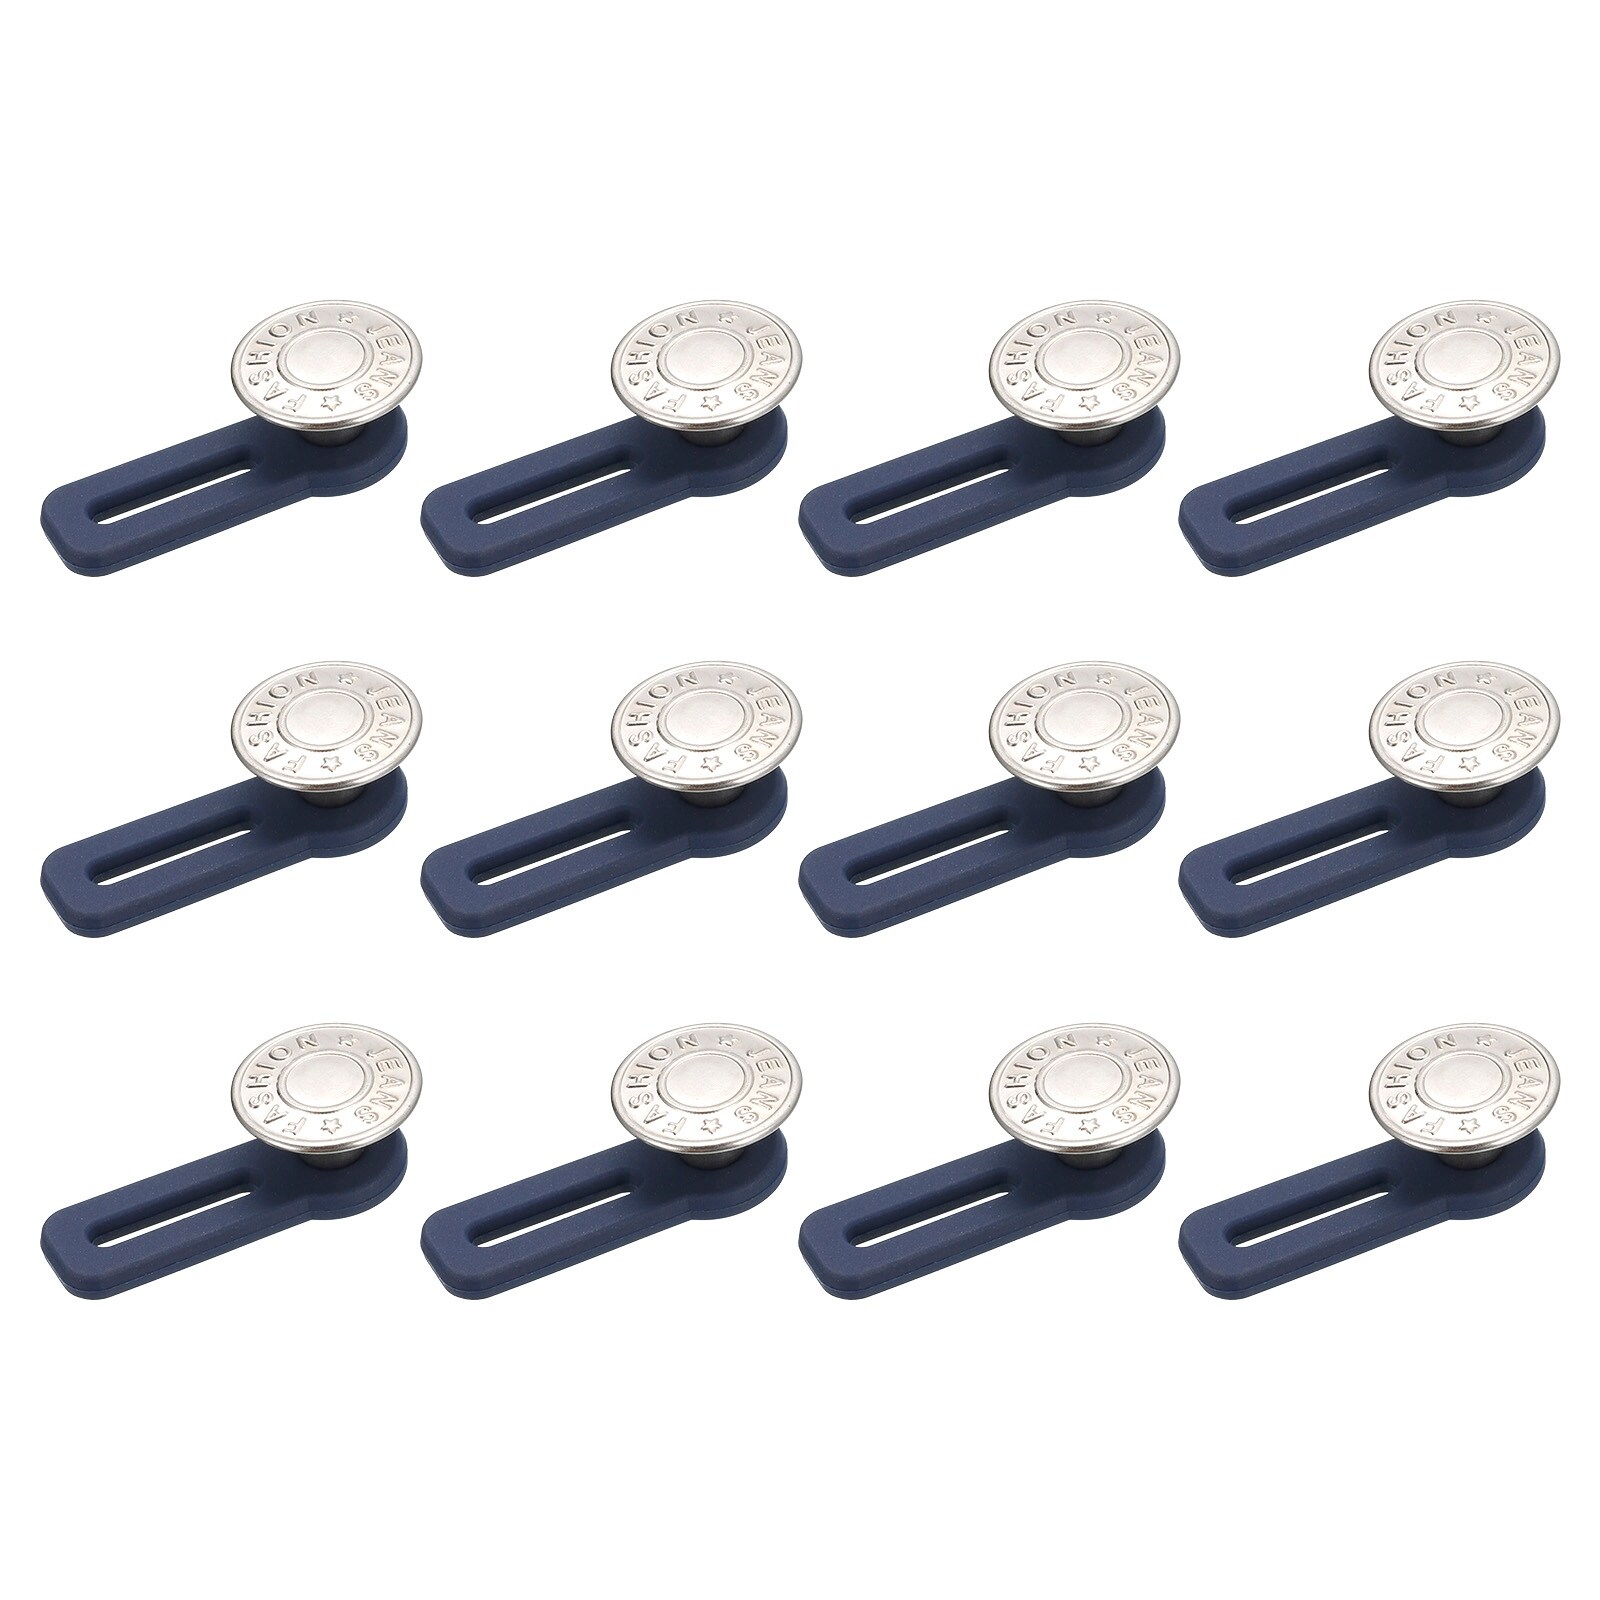 Button Extenders, 12pcs - Waist Extenders for Pants for Women and Men(Silver)  - Silver - Bed Bath & Beyond - 37559221